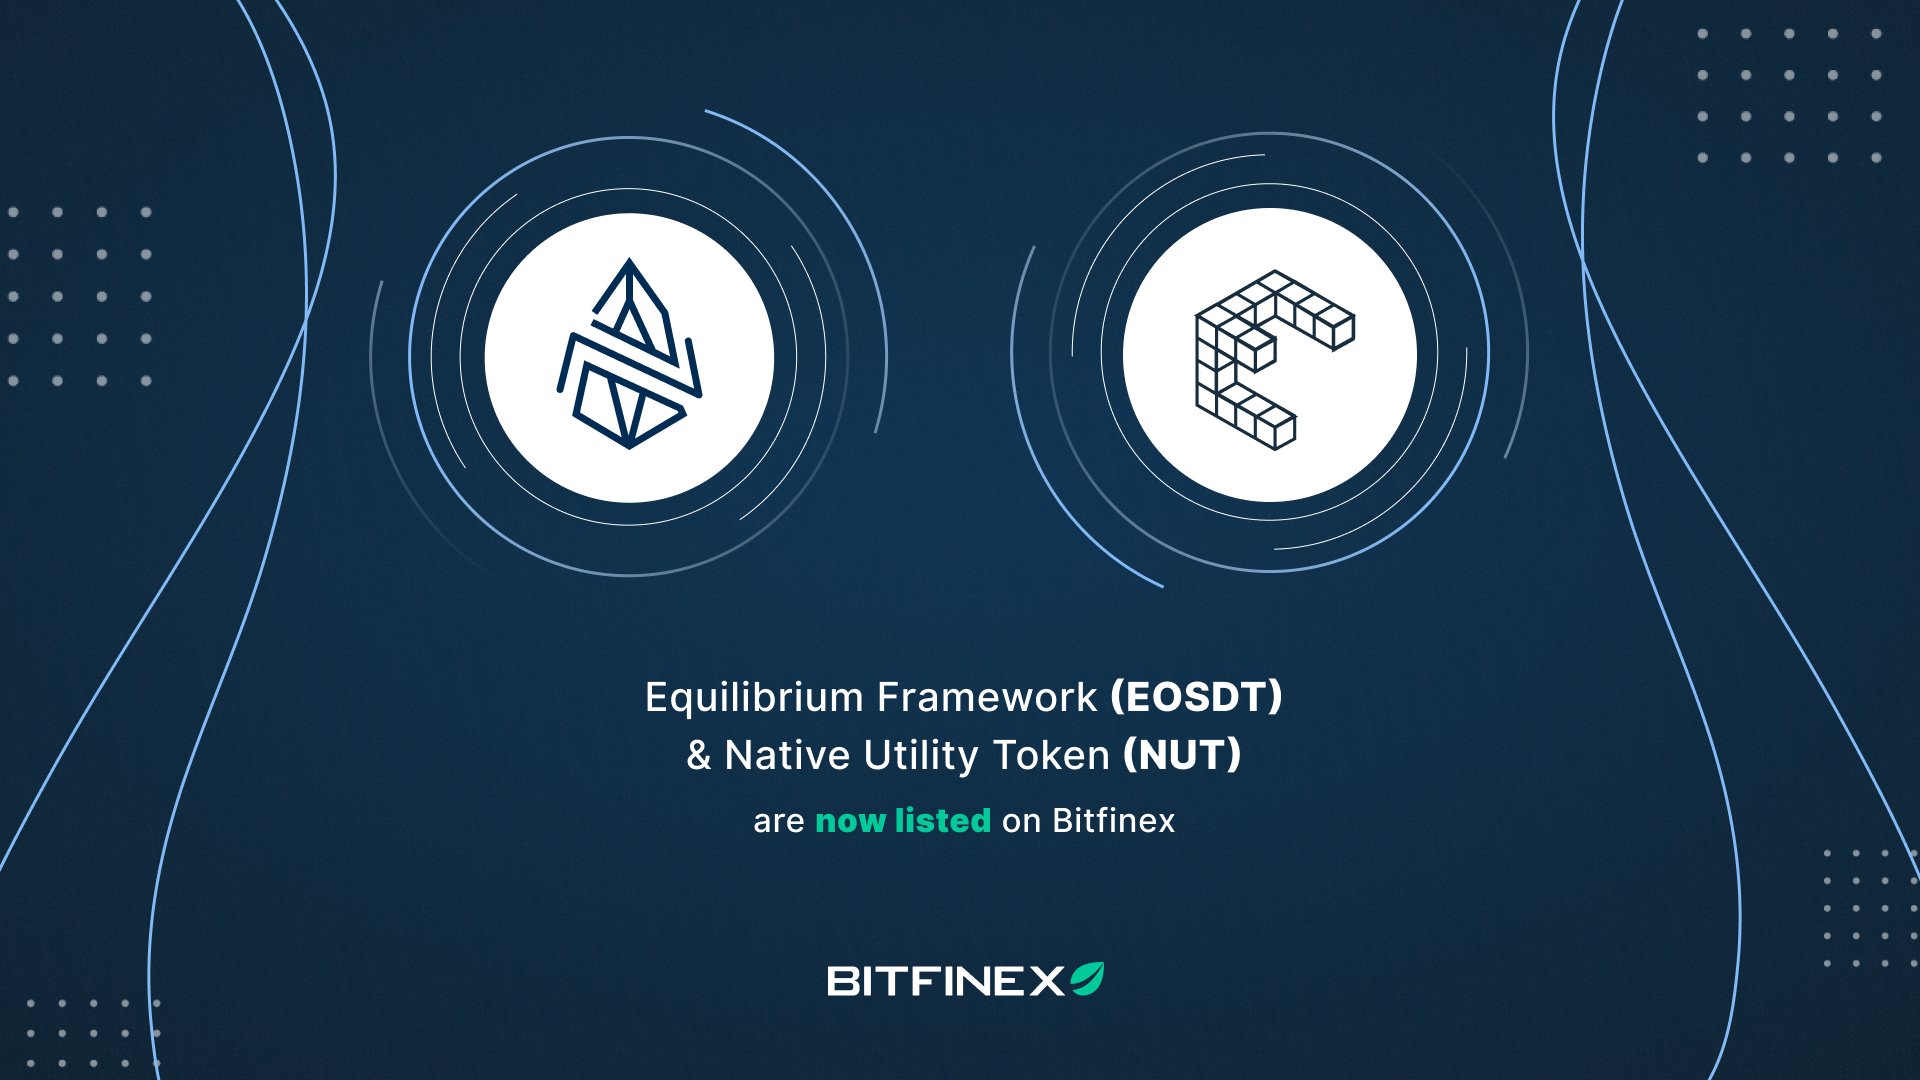 Bitfinex has listed EOSDT and NUT - Smart Liquidity Network